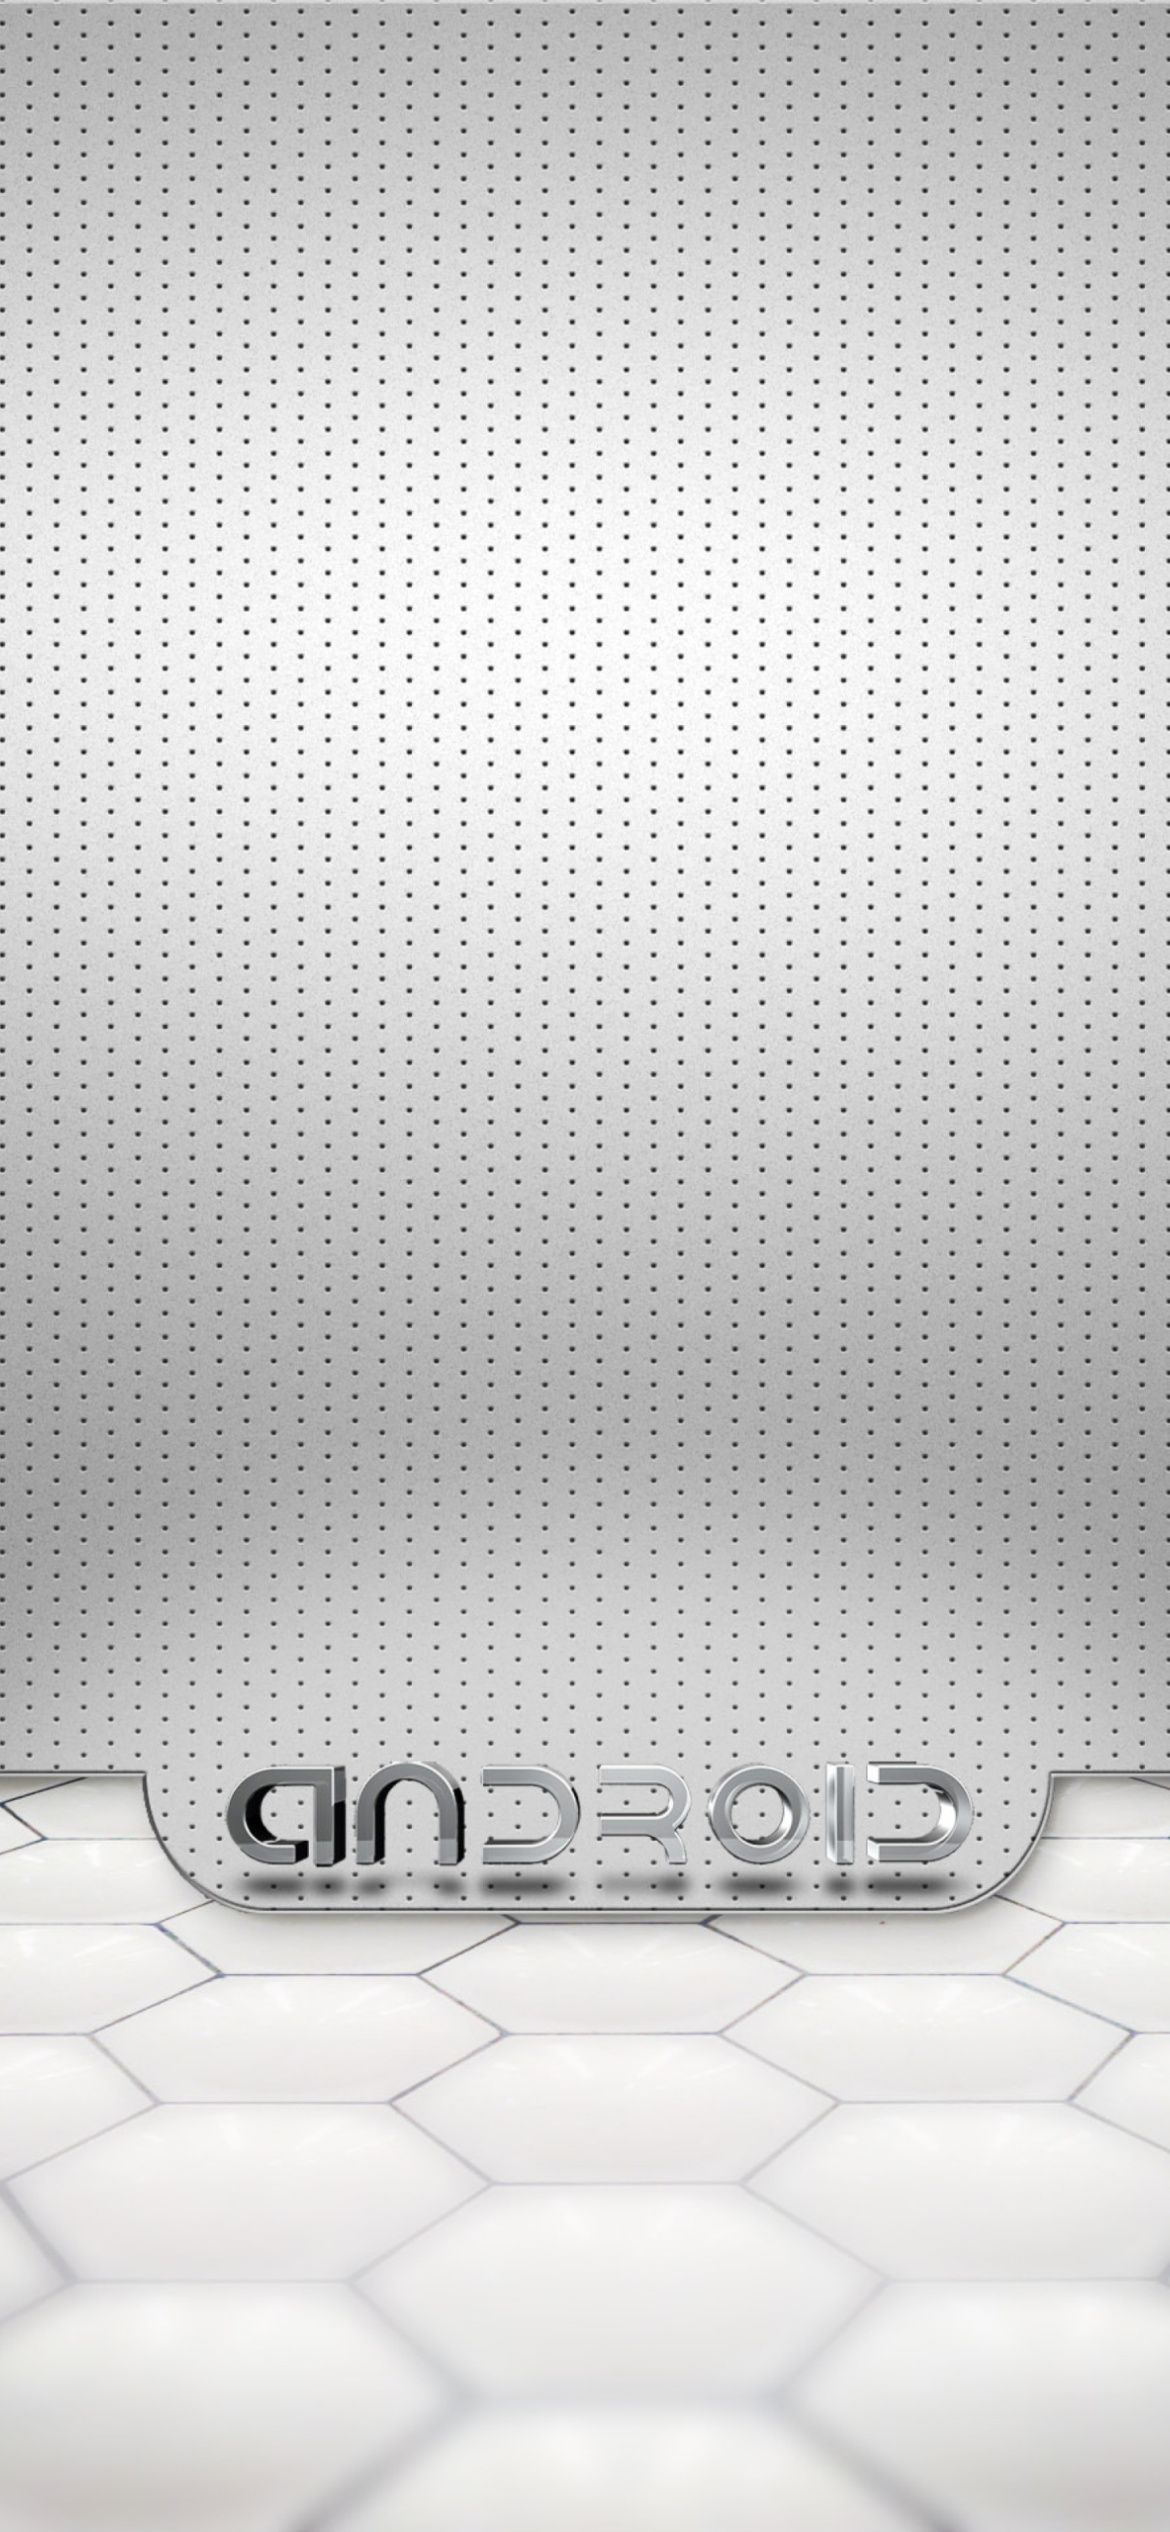 Android Logo wallpaper 1170x2532